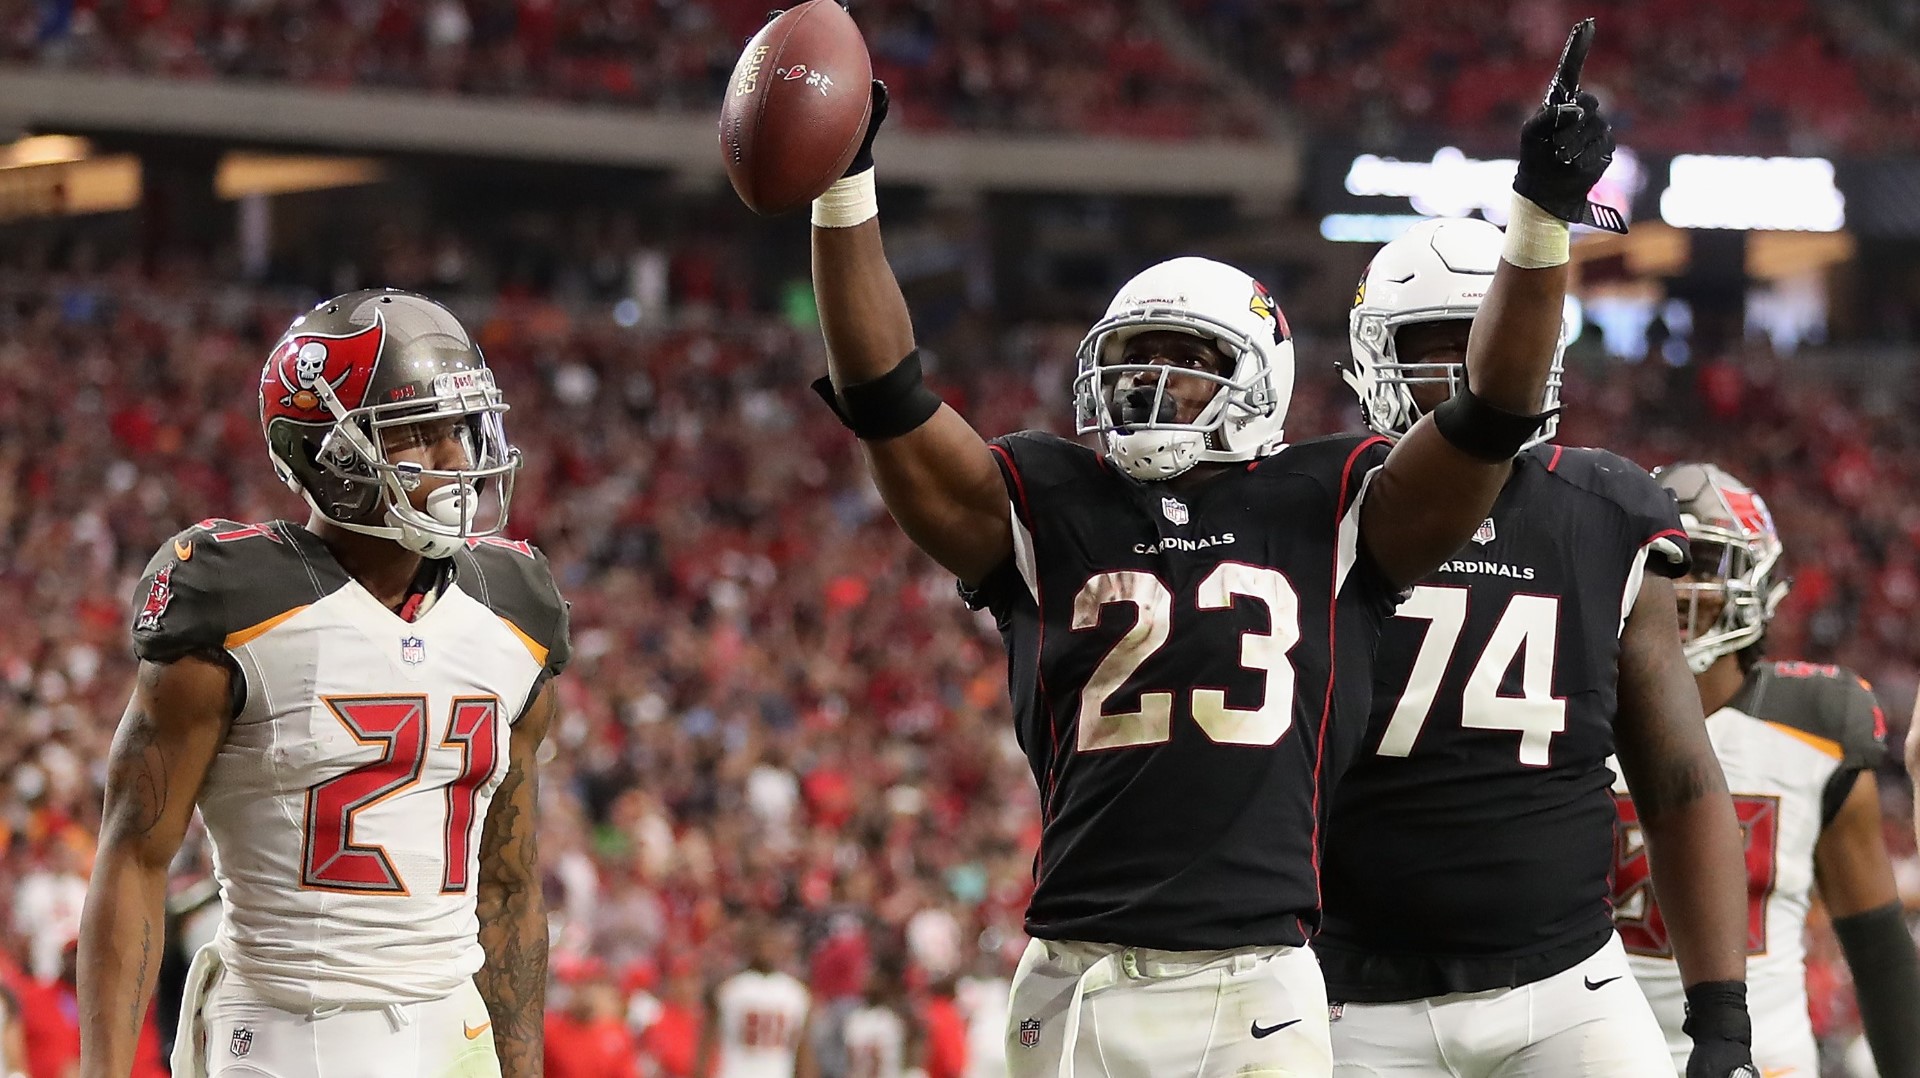 Peterson scored twice as Cardinals hold off Bucs 38-33